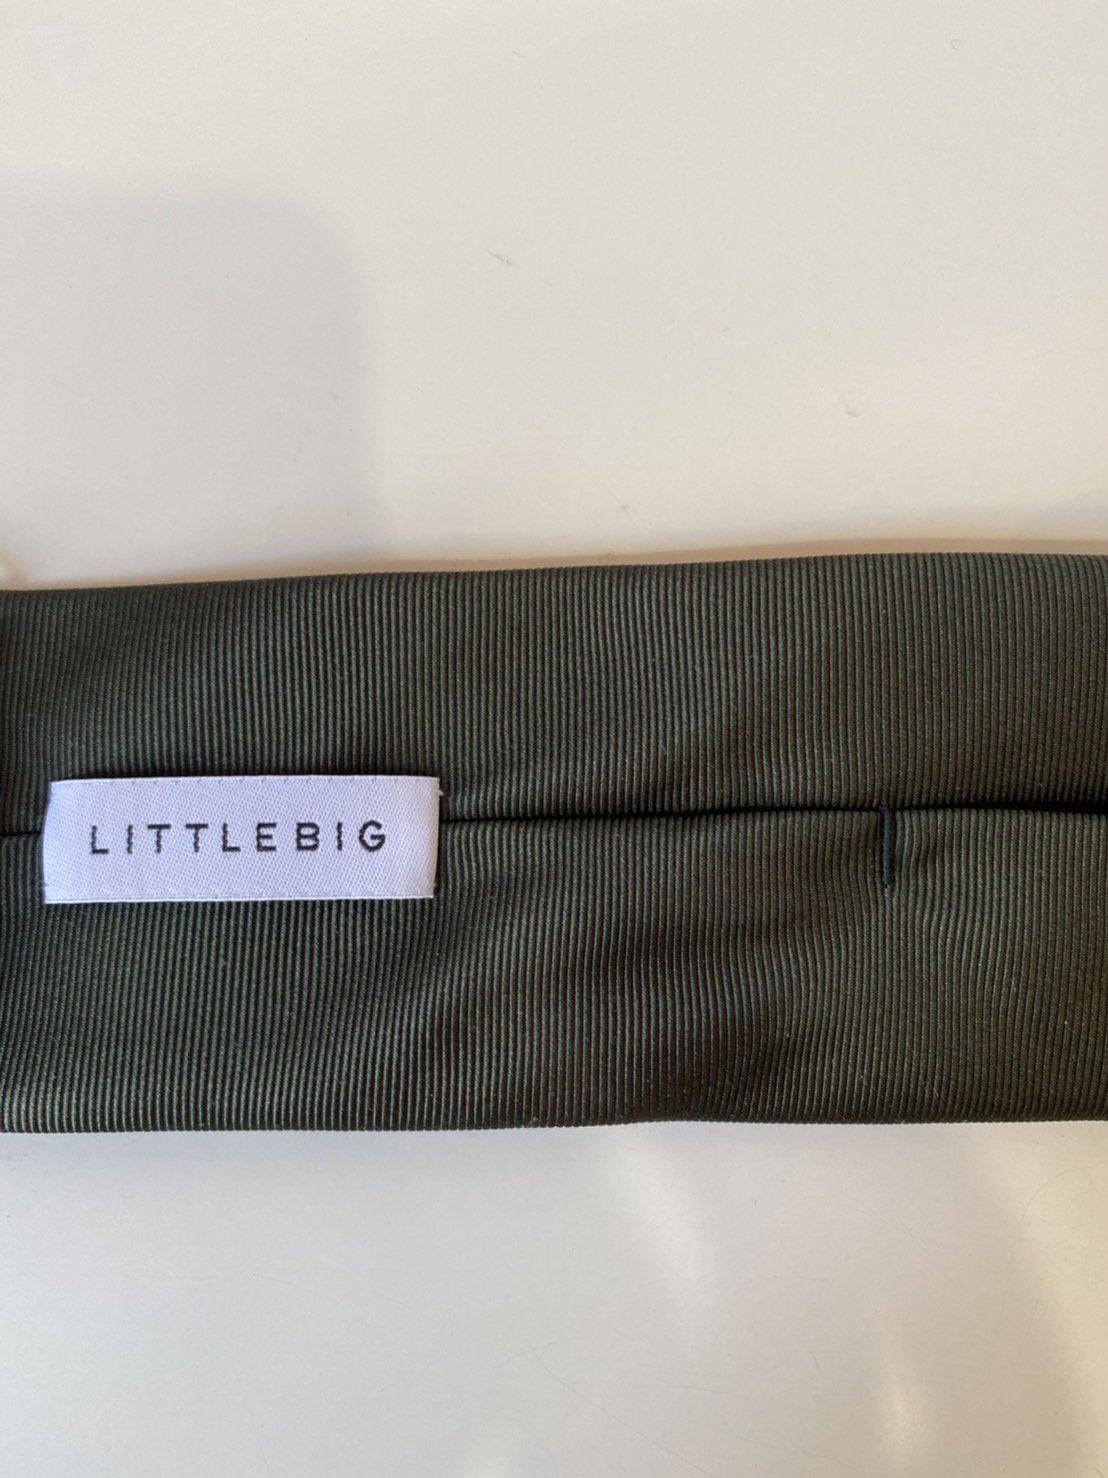 LITTLEBIG<br />Silk Narrow Tie / Green<img class='new_mark_img2' src='https://img.shop-pro.jp/img/new/icons14.gif' style='border:none;display:inline;margin:0px;padding:0px;width:auto;' />